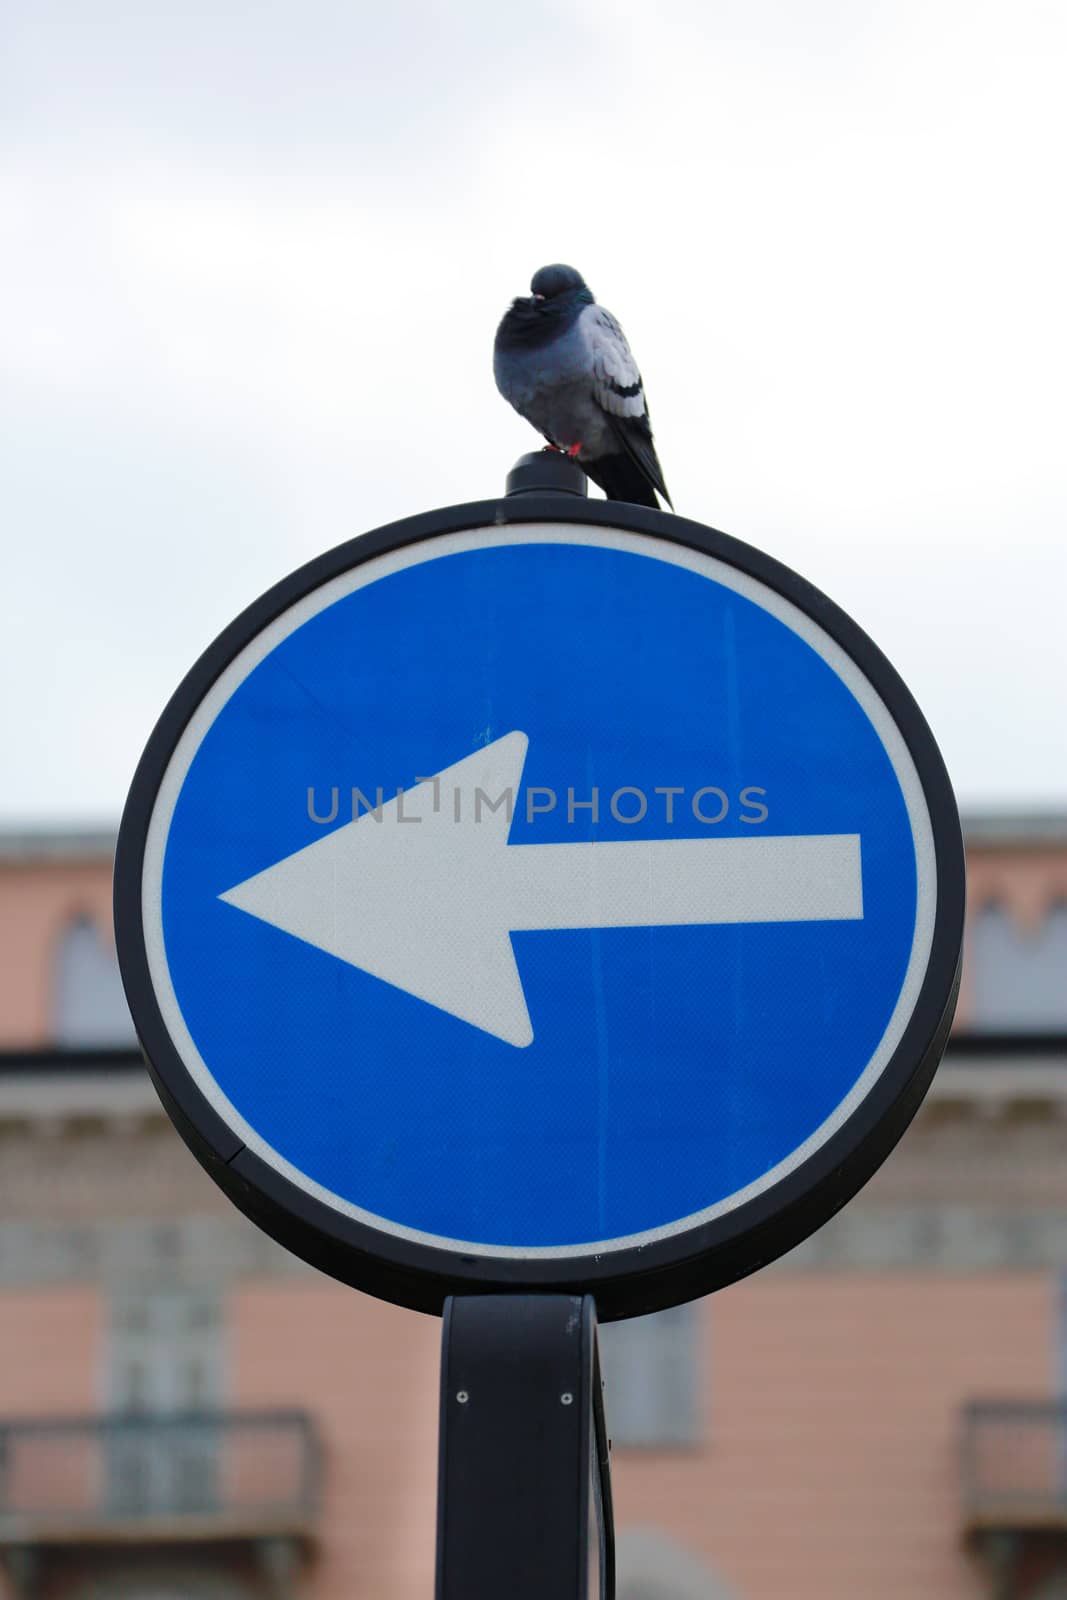 One Way Directional Traffic Sign in Italia
 by bensib